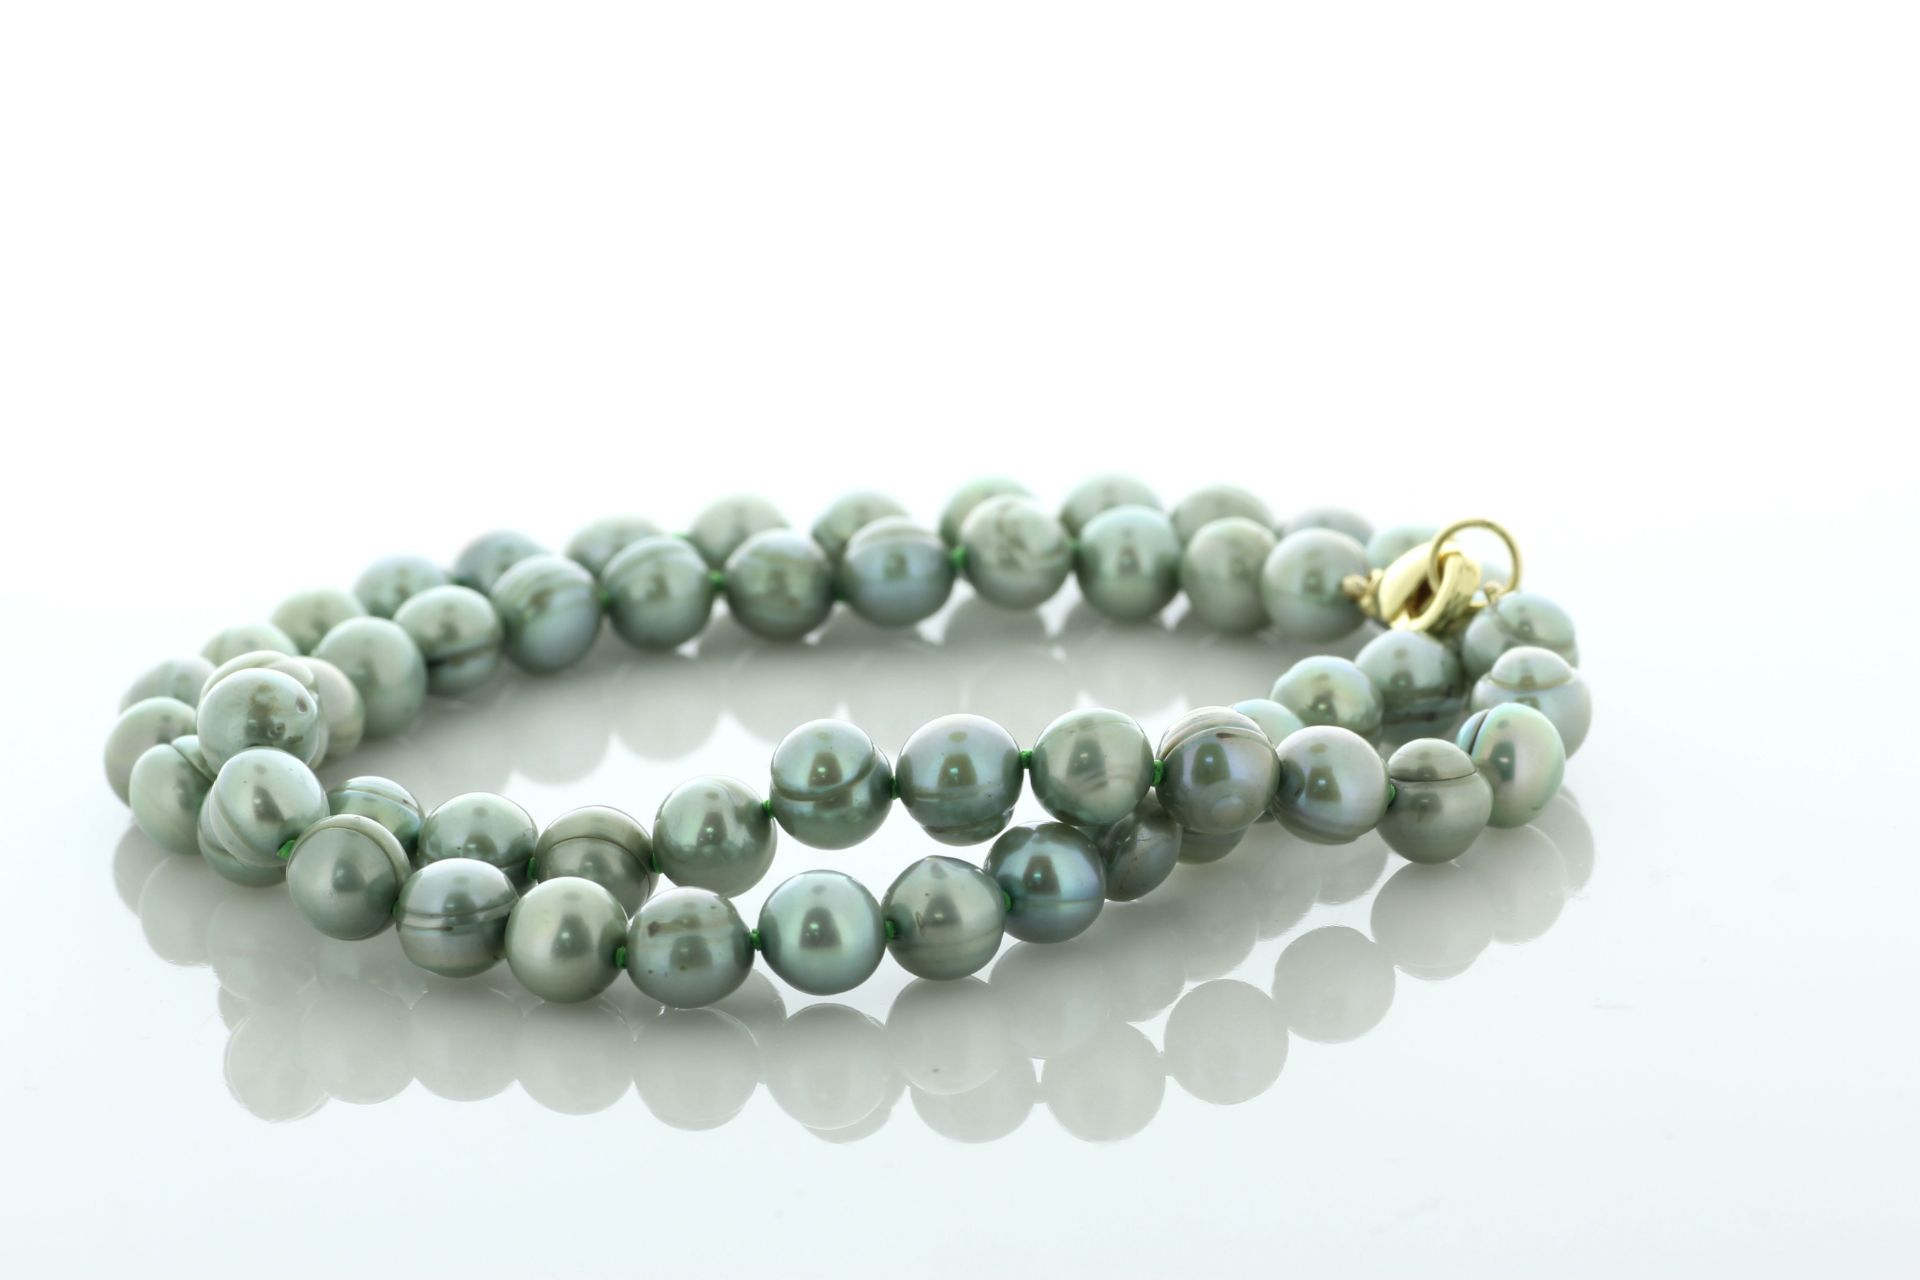 18 Inch Freshwater Cultured 7.0 - 7.5mm Pearl Necklace With Gold Plated Clasp - Valued By AGI £280. - Image 3 of 5